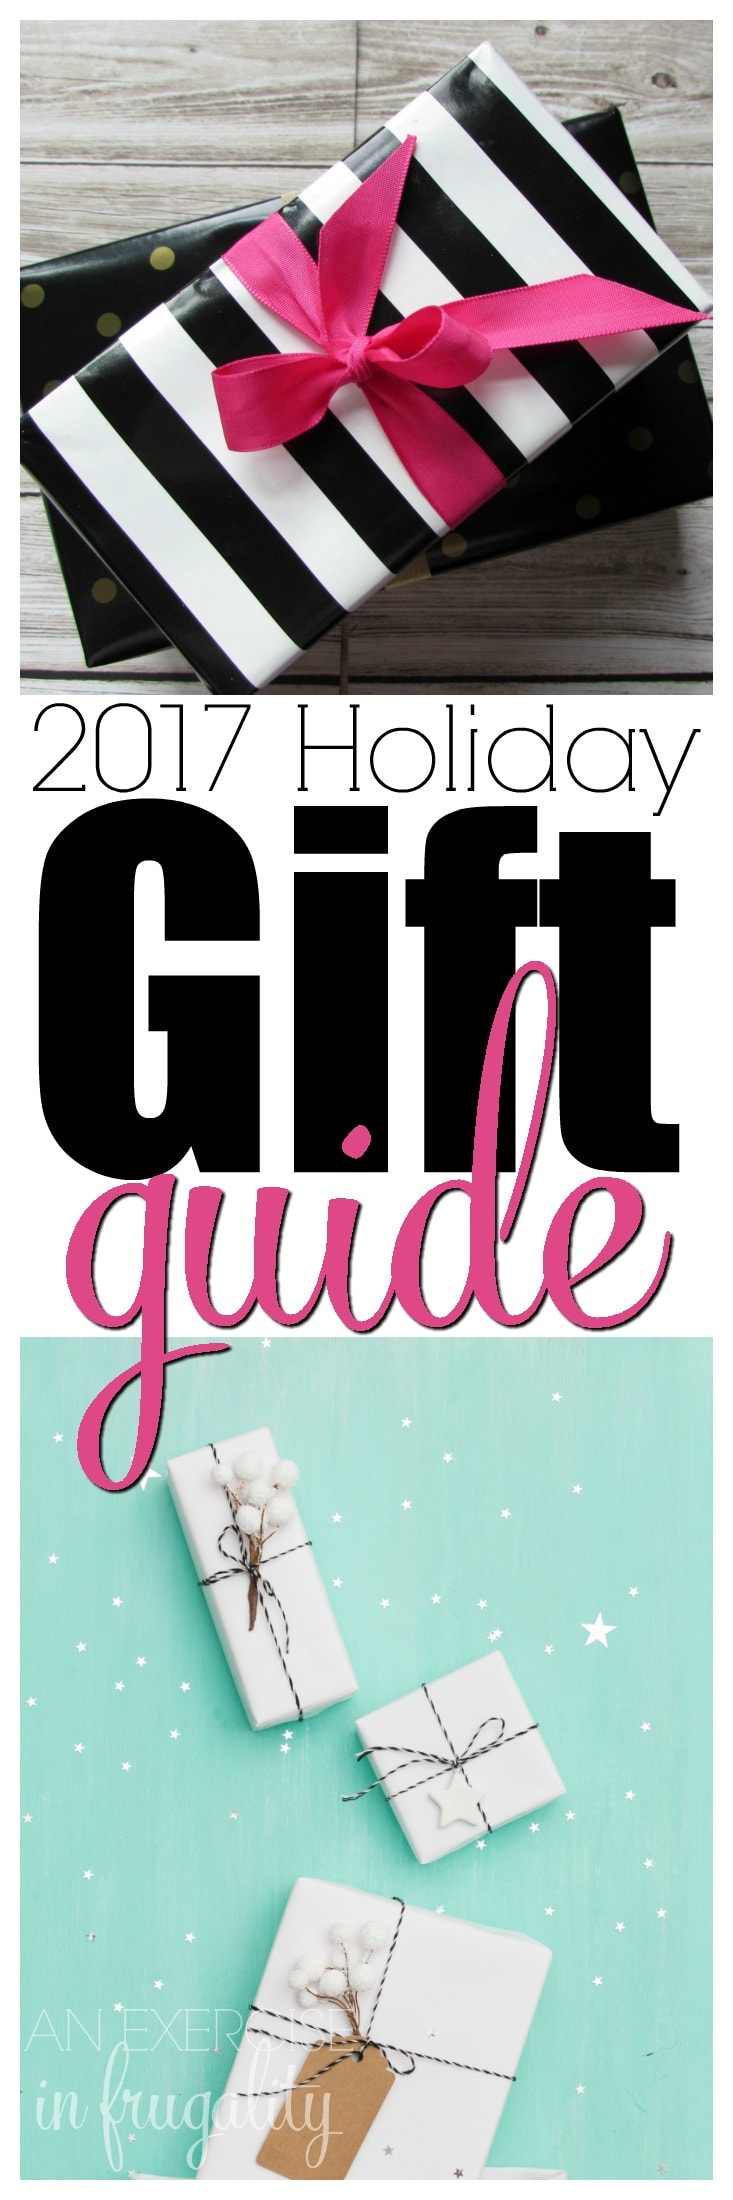 Holiday Gift Guide 2017- The BEST selection of amazing, thoughtful and useful holiday gifts for everyone on your shopping list. We have curated some of the coolest stuff based on this years holiday trends. Gift ideas for every budget!